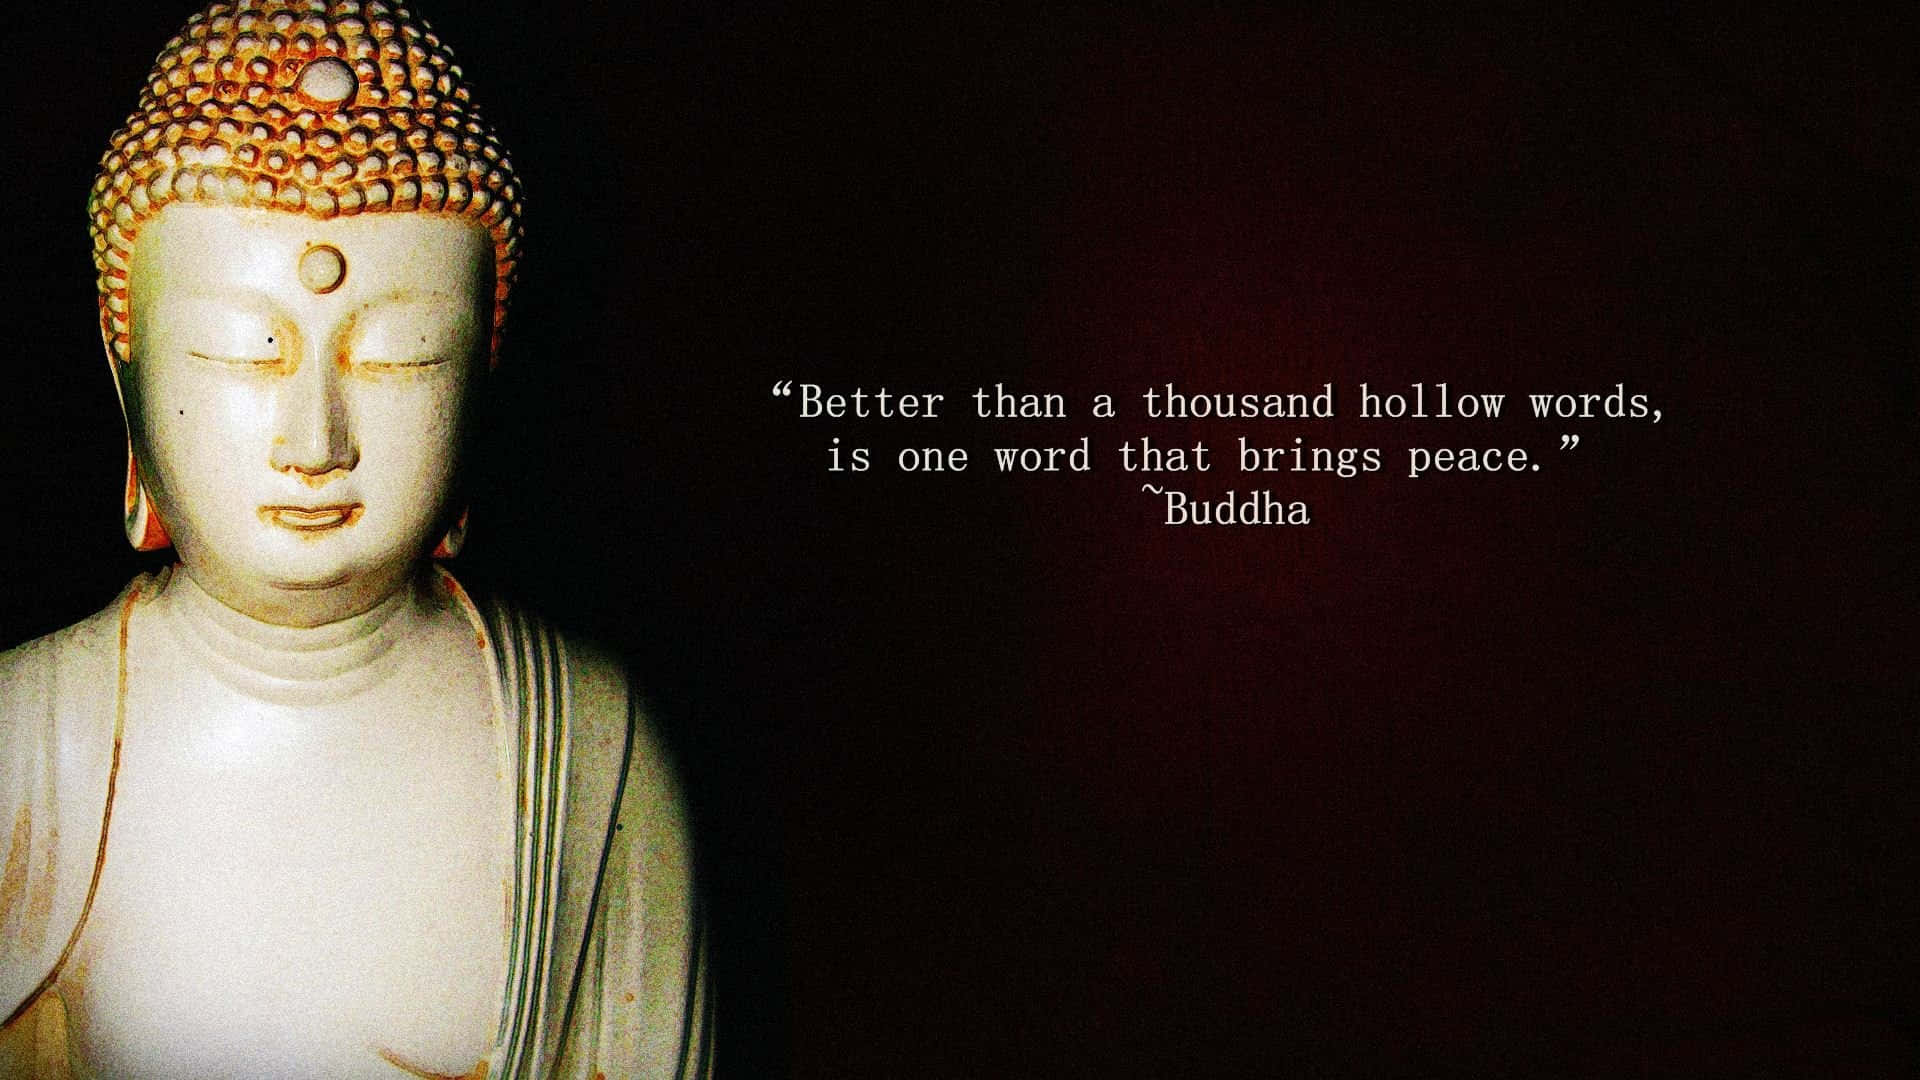 Find your inner peace with the help of the Buddha